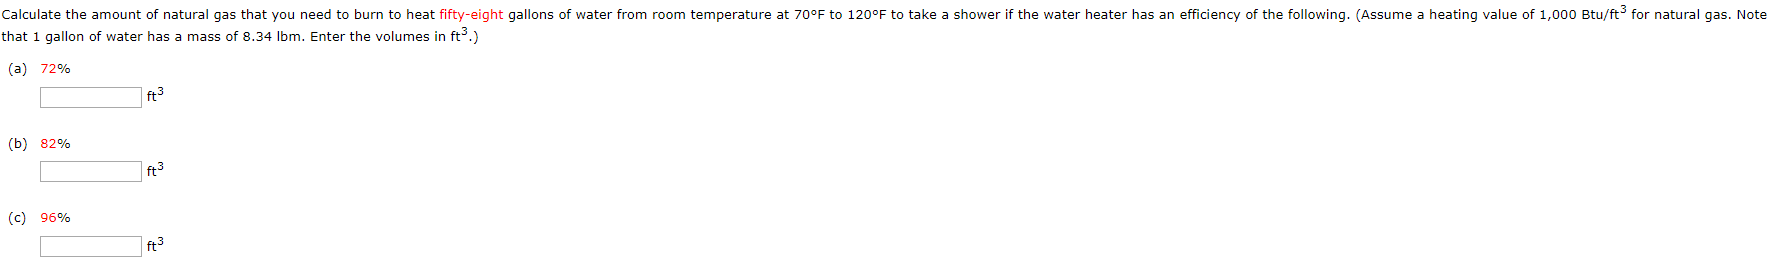 Calculate the amount of natural gas that you need to burn to heat fifty-eight gallons of water from room temperature at 70°F to 120°F to take a shower if the water heater has an efficiency of the following. (Assume a heating value of 1,000 Btu/ft3 for natural gas. Note
that 1 gallon of water has a mass of 8.34 Ibm. Enter the volumes in ft3.)
(a) 72%
ft3
(b) 82%
| ft3
(c) 96%
| ft3
